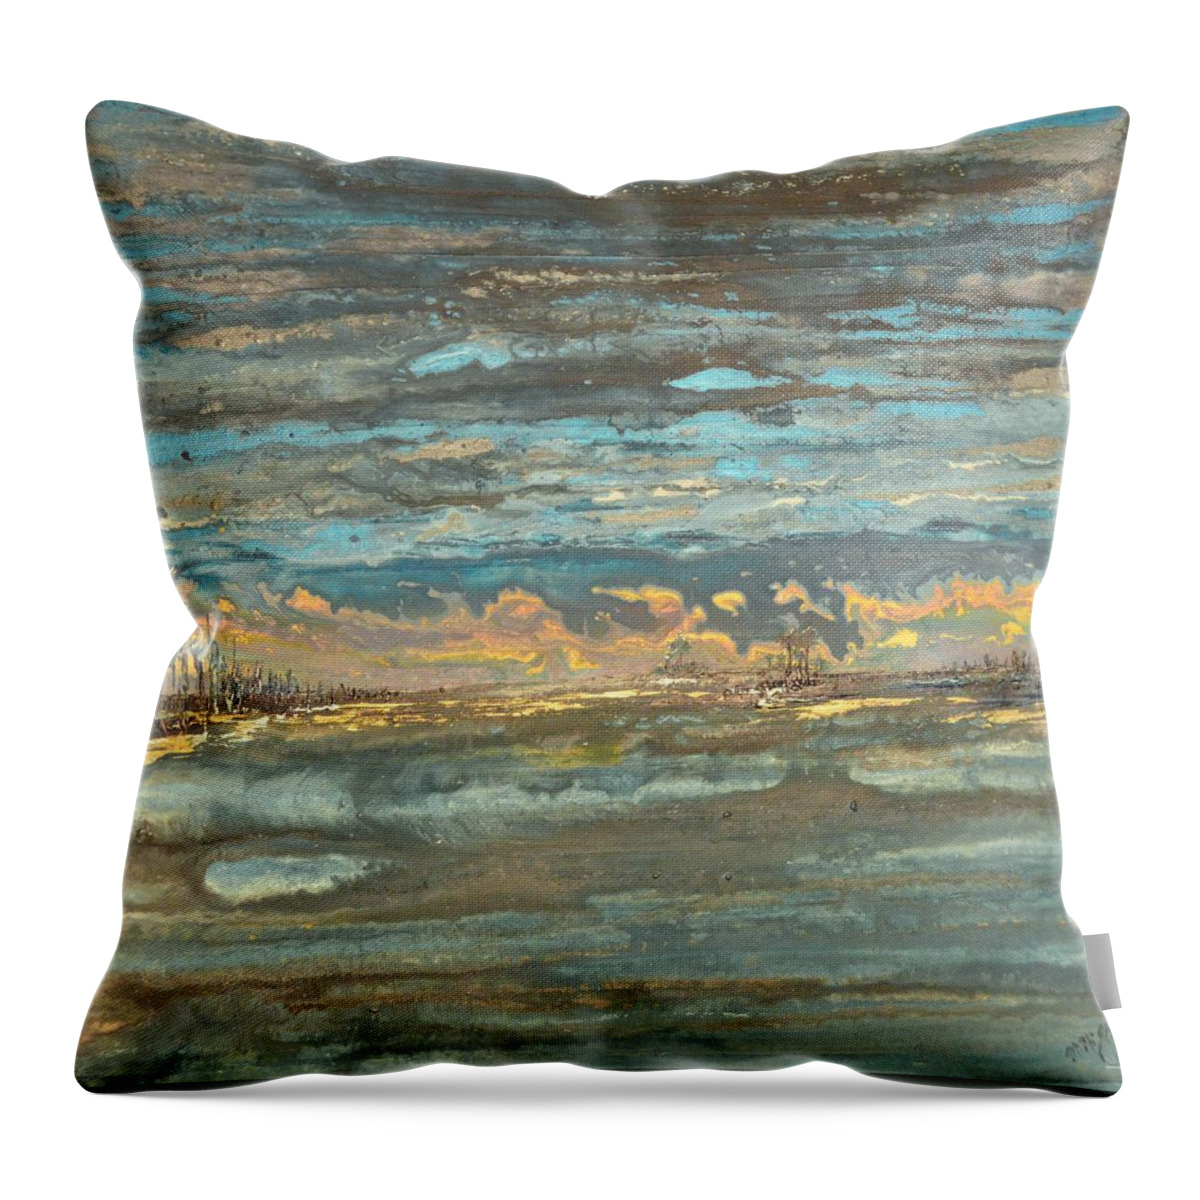  Throw Pillow featuring the painting Dark Serene by MiMi Stirn